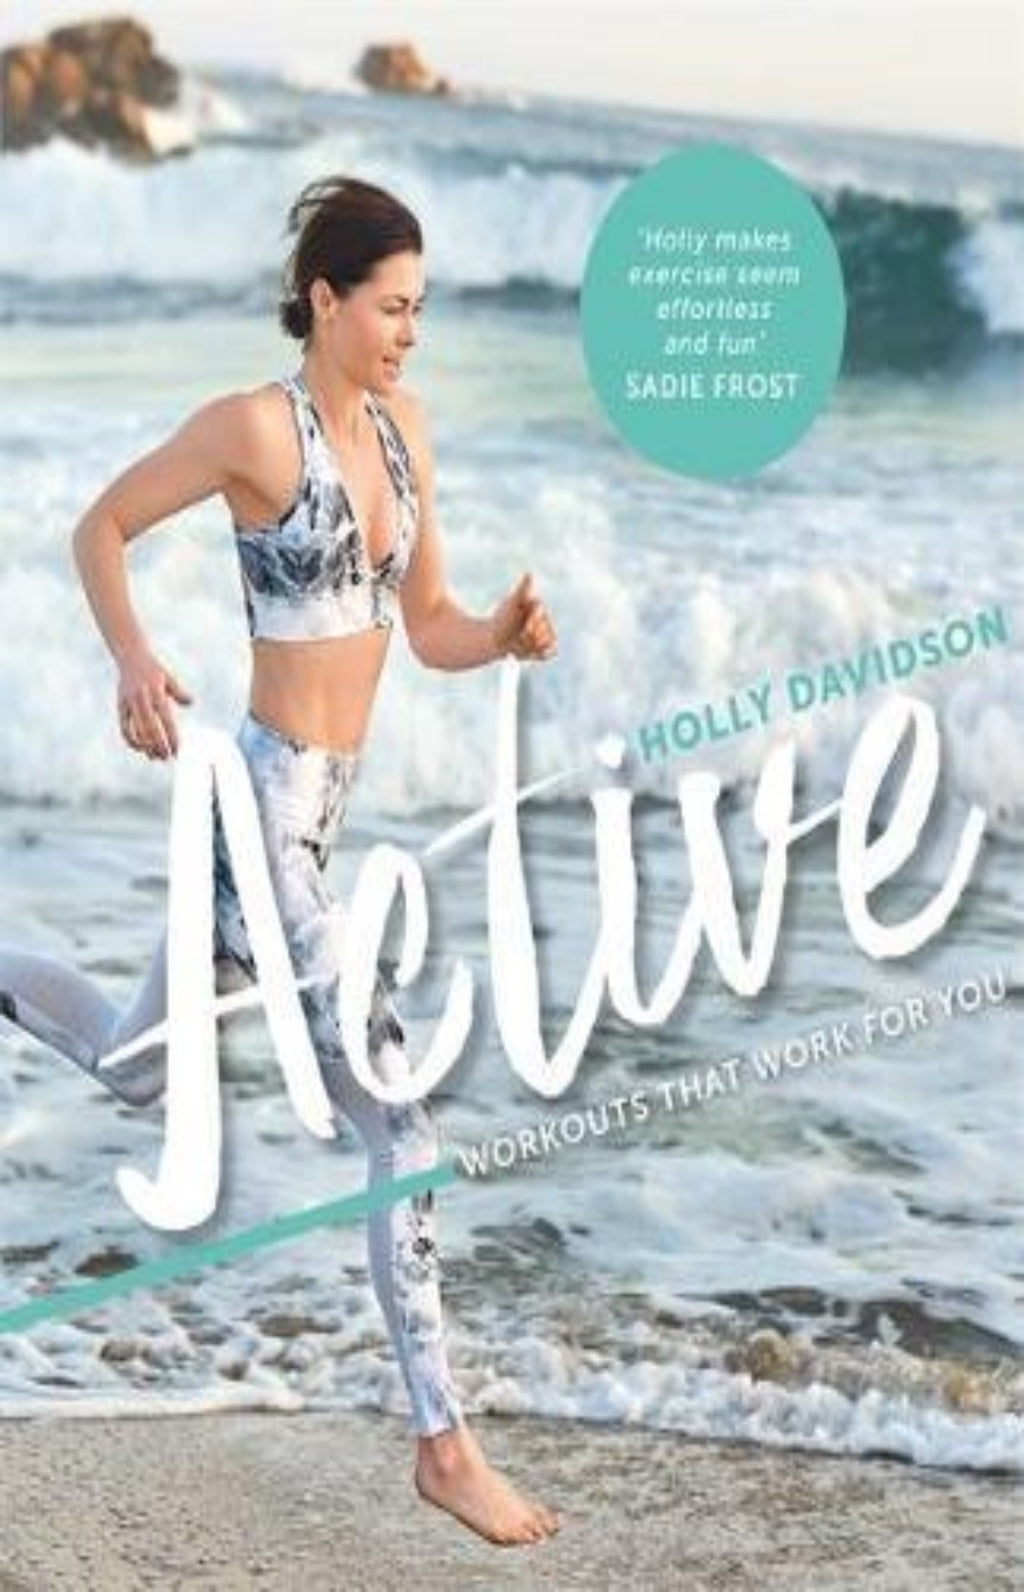 Active : Workouts That Work for You